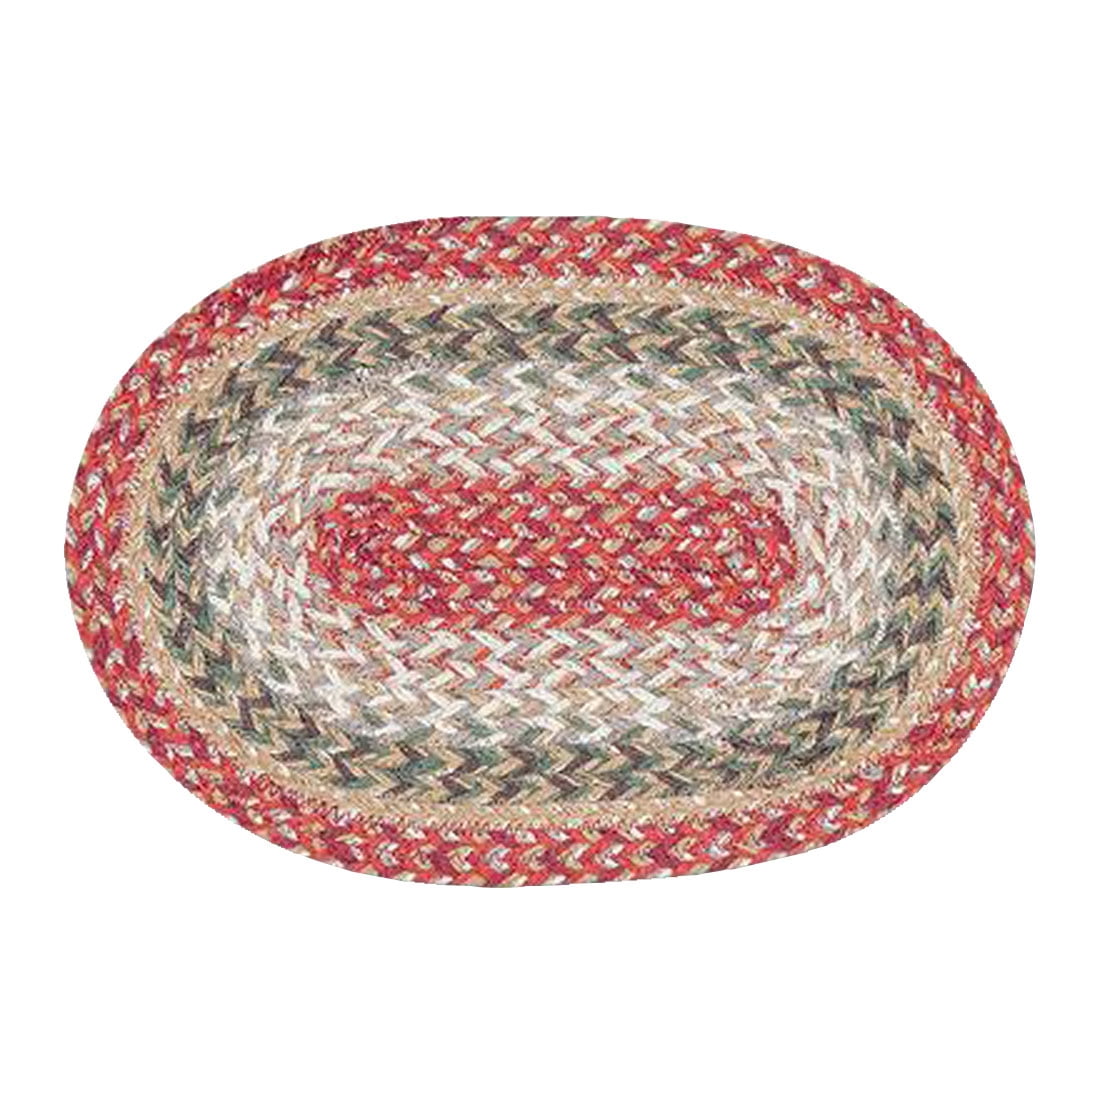 Capitol Importing 01-992 Sage Miniature Swatch Oval Rug, 7.5 X 11 In.